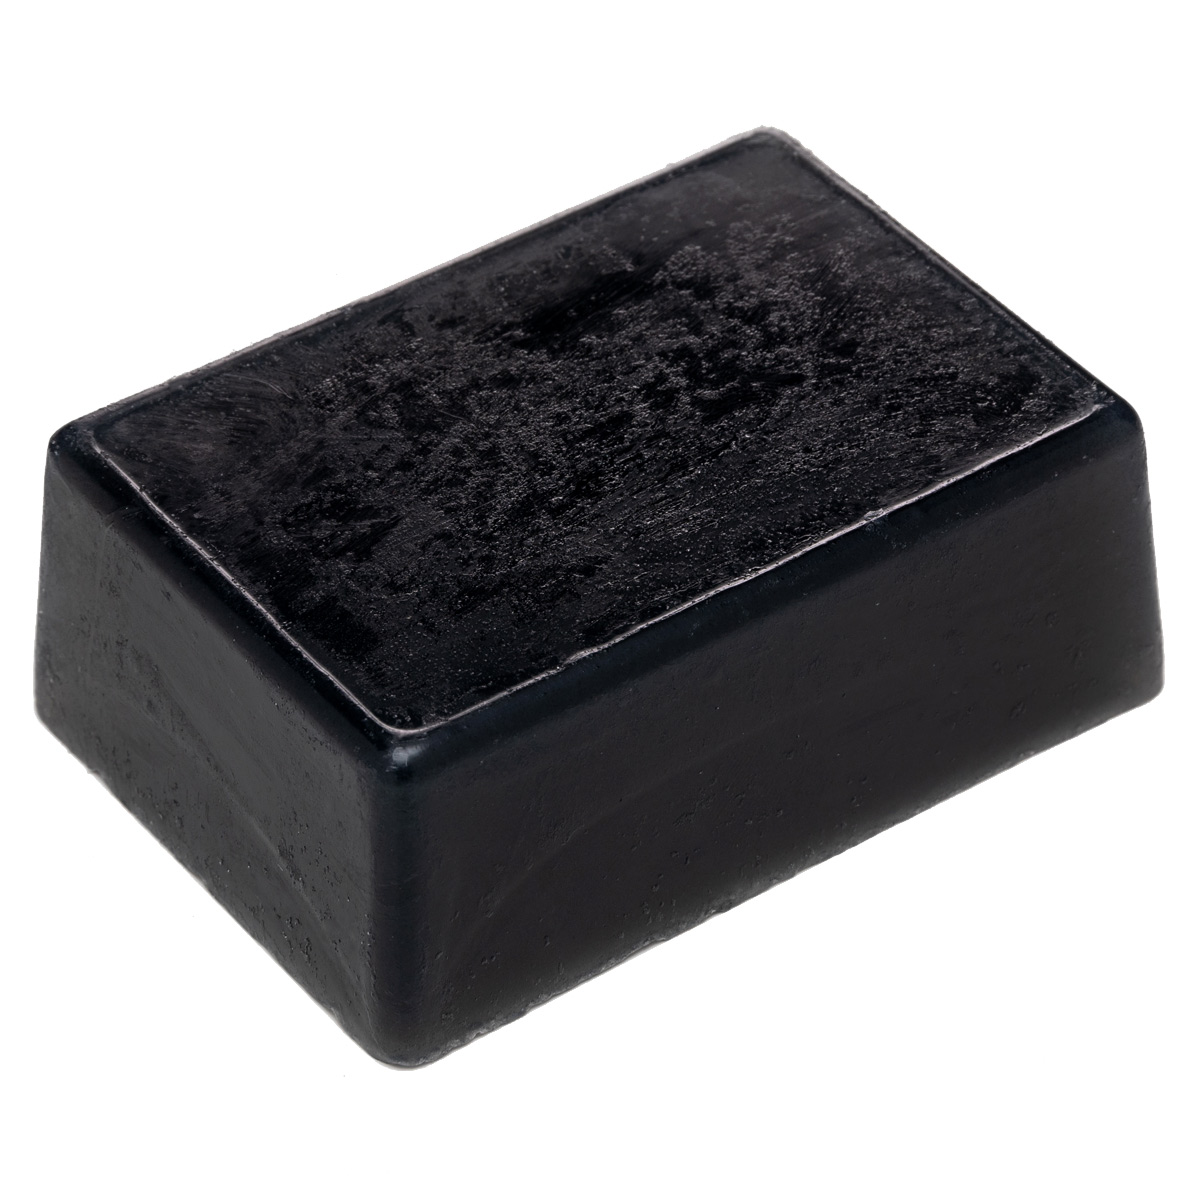 Pure activated charcoal body bar